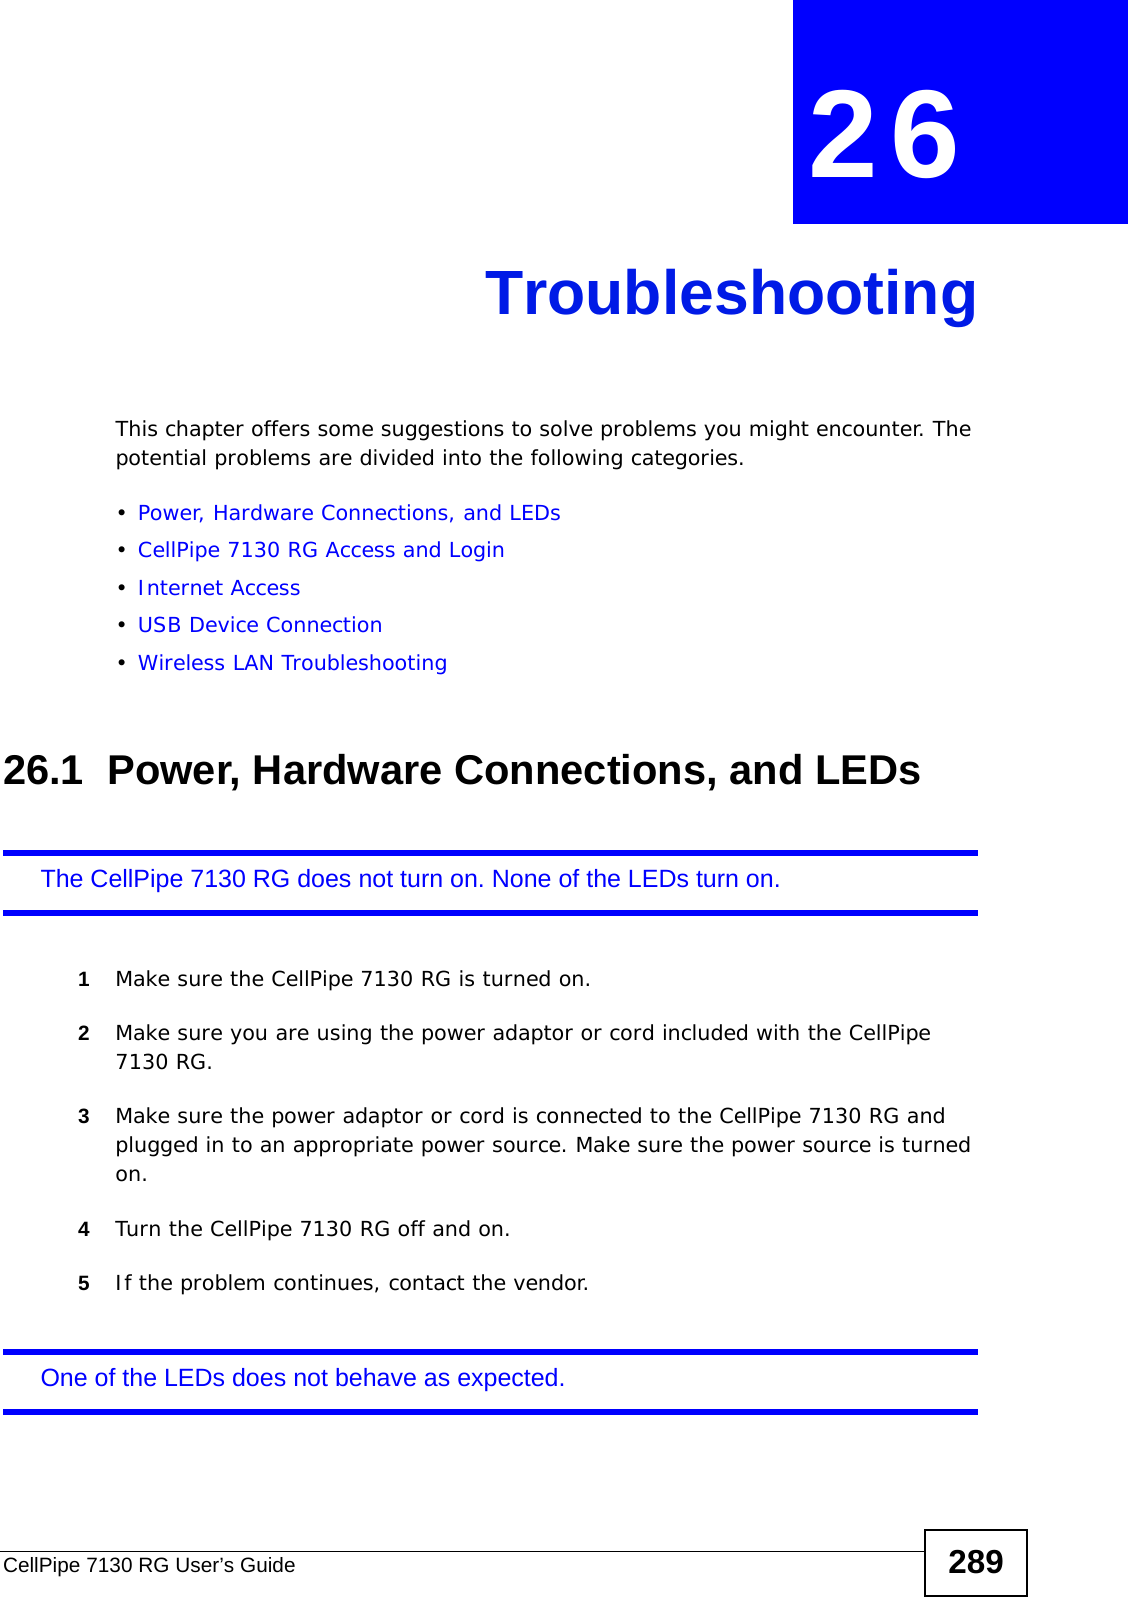 CellPipe 7130 RG User’s Guide 289CHAPTER  26 TroubleshootingThis chapter offers some suggestions to solve problems you might encounter. The potential problems are divided into the following categories. •Power, Hardware Connections, and LEDs•CellPipe 7130 RG Access and Login•Internet Access•USB Device Connection•Wireless LAN Troubleshooting26.1  Power, Hardware Connections, and LEDsThe CellPipe 7130 RG does not turn on. None of the LEDs turn on.1Make sure the CellPipe 7130 RG is turned on. 2Make sure you are using the power adaptor or cord included with the CellPipe 7130 RG.3Make sure the power adaptor or cord is connected to the CellPipe 7130 RG and plugged in to an appropriate power source. Make sure the power source is turned on.4Turn the CellPipe 7130 RG off and on. 5If the problem continues, contact the vendor.One of the LEDs does not behave as expected.